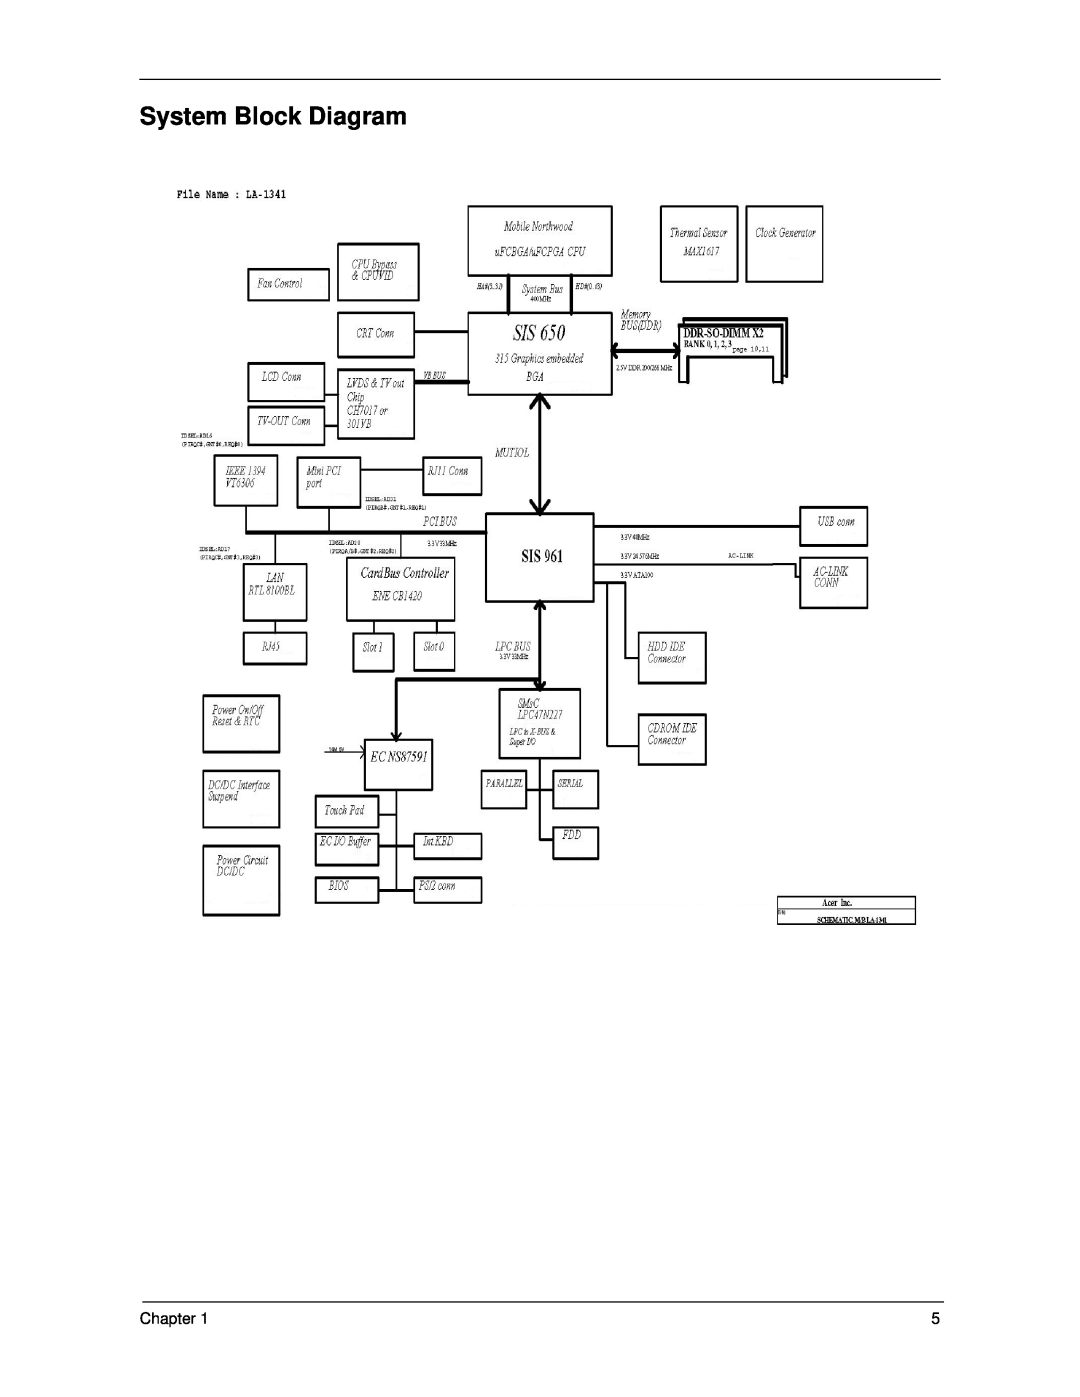 Acer 270 manual System Block Diagram, Chapter 